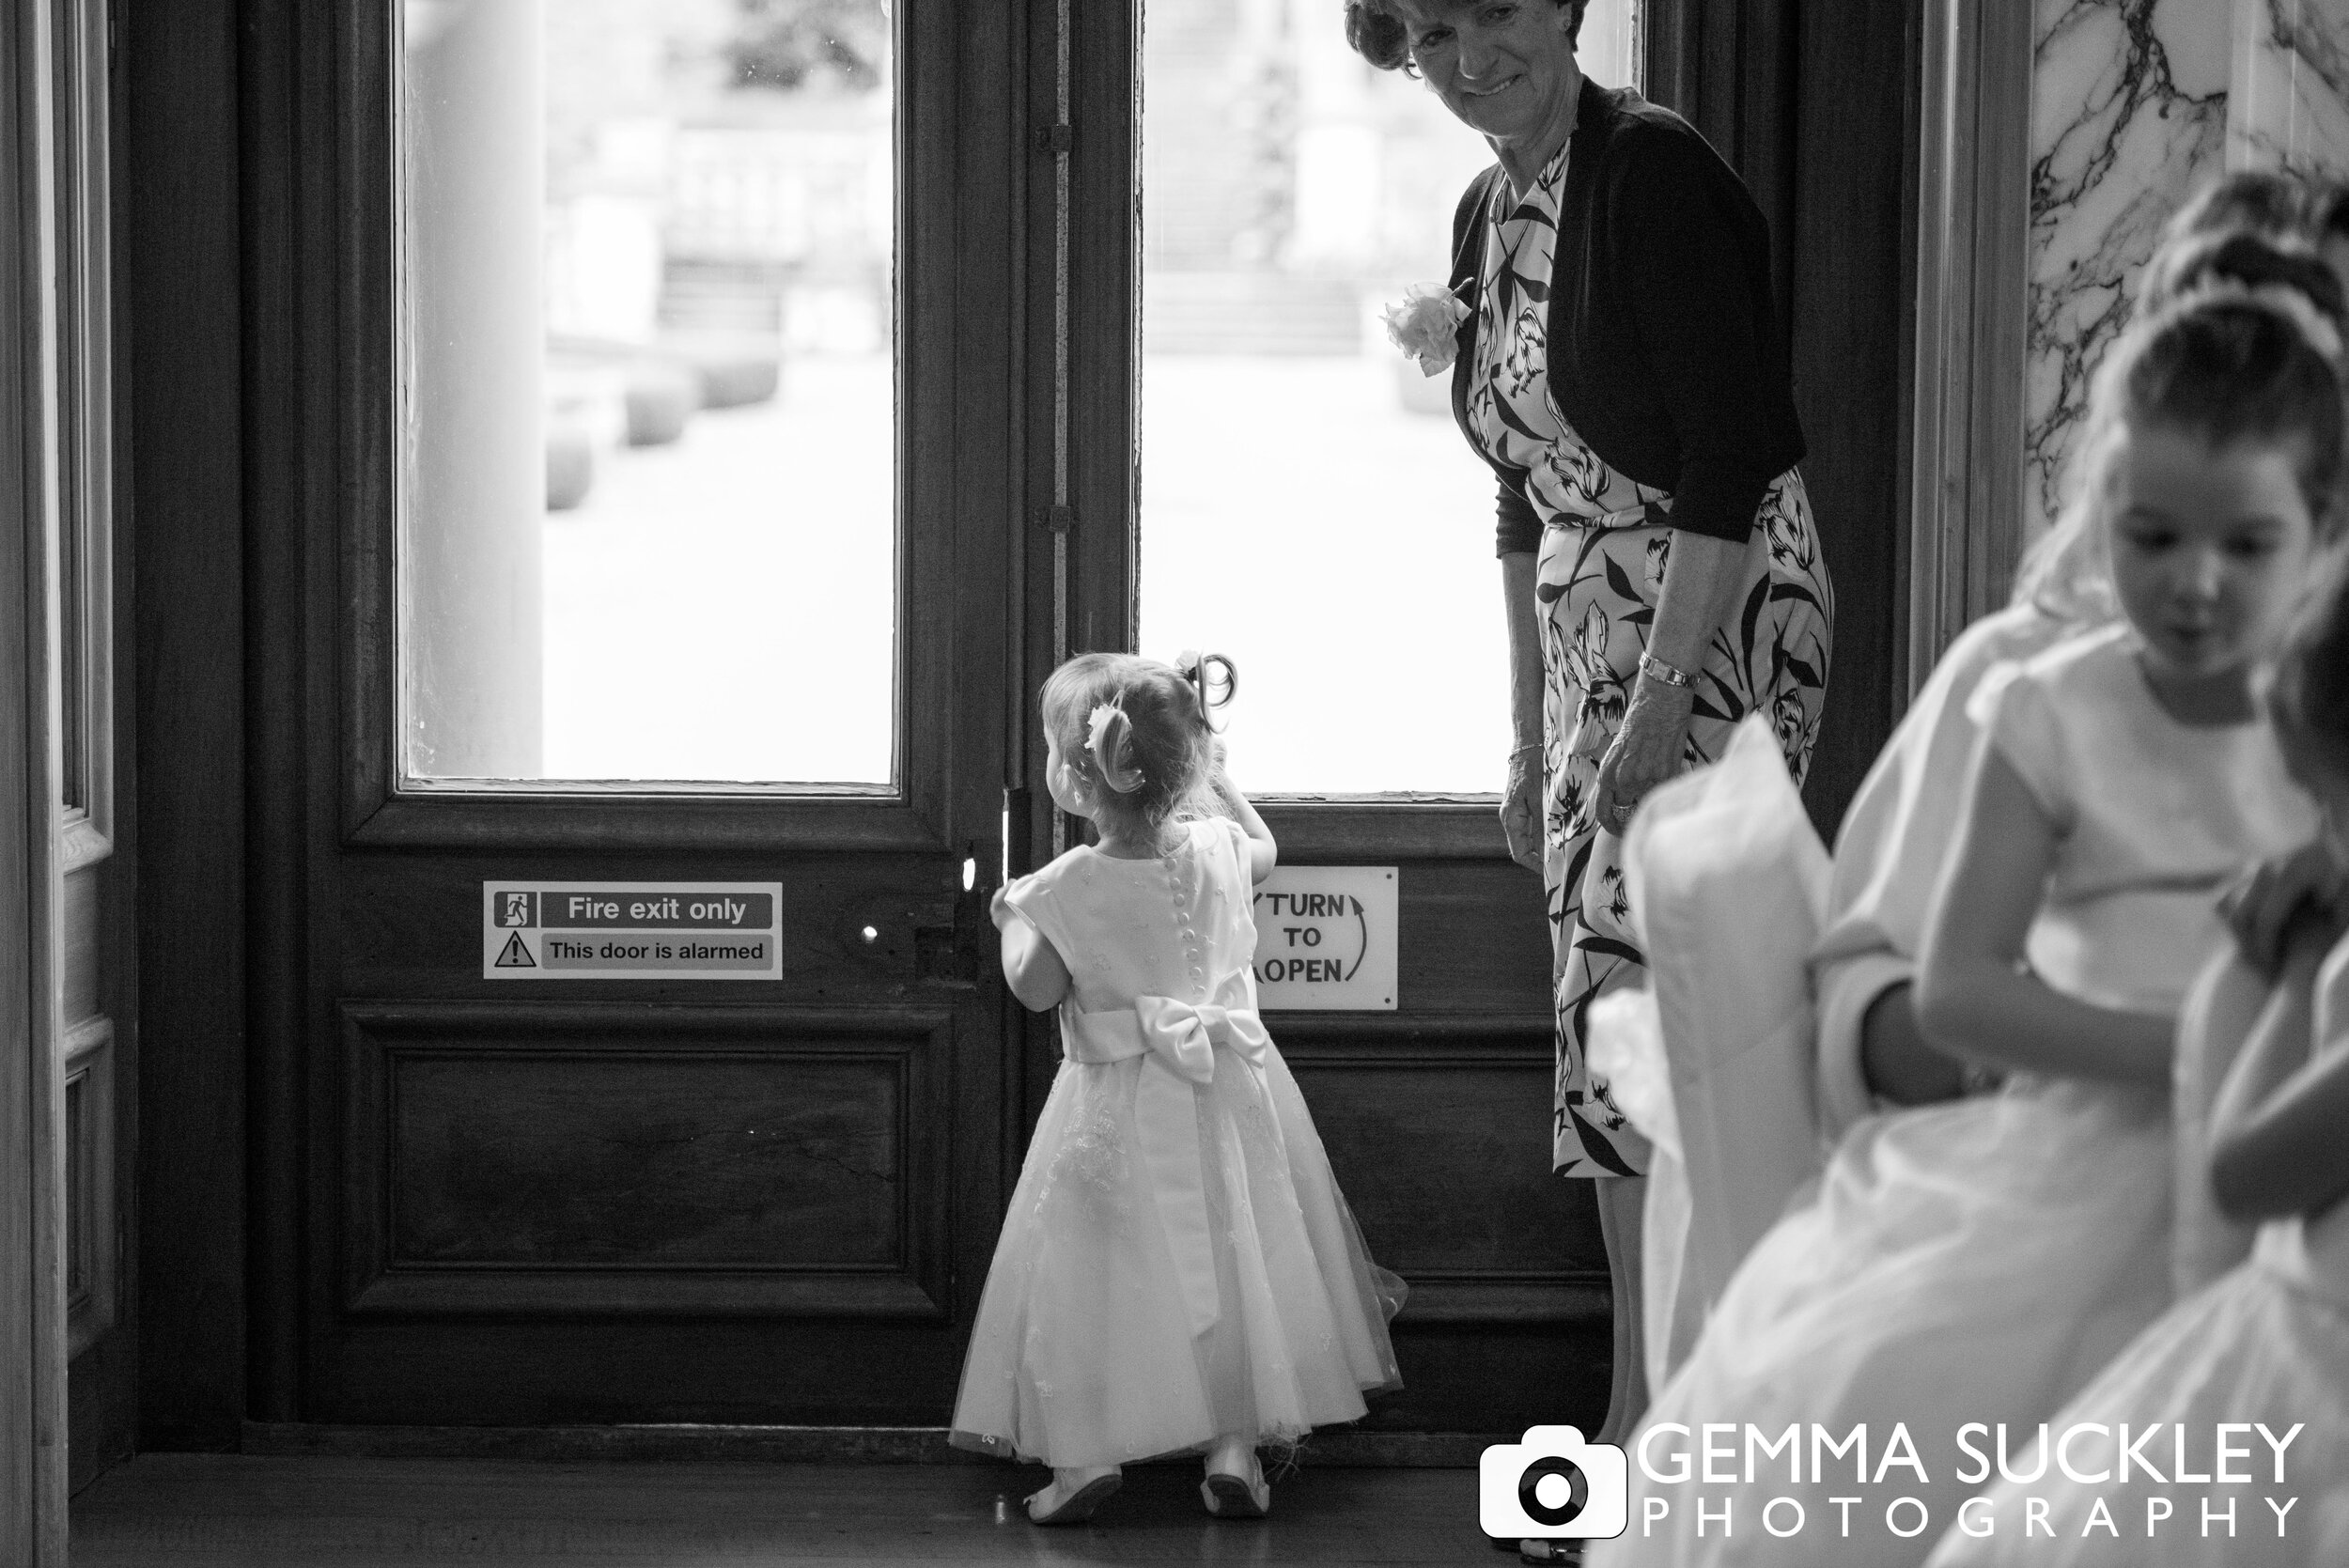 flower girl looking out the exit door on her tip toes